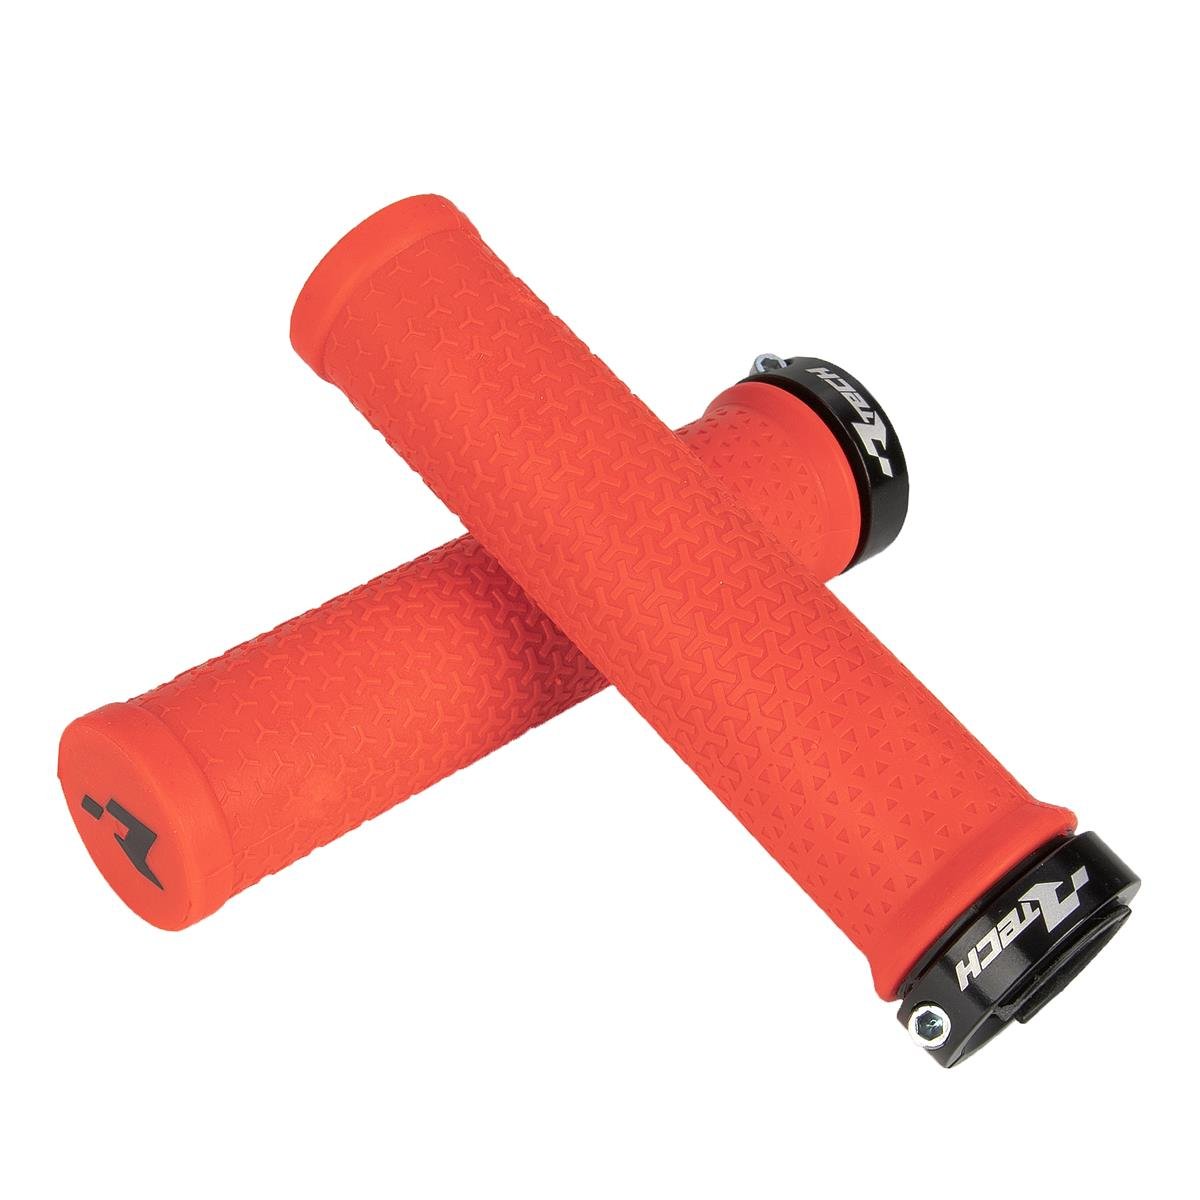 RTECH MTB Grips R20 Lock-On System, Red